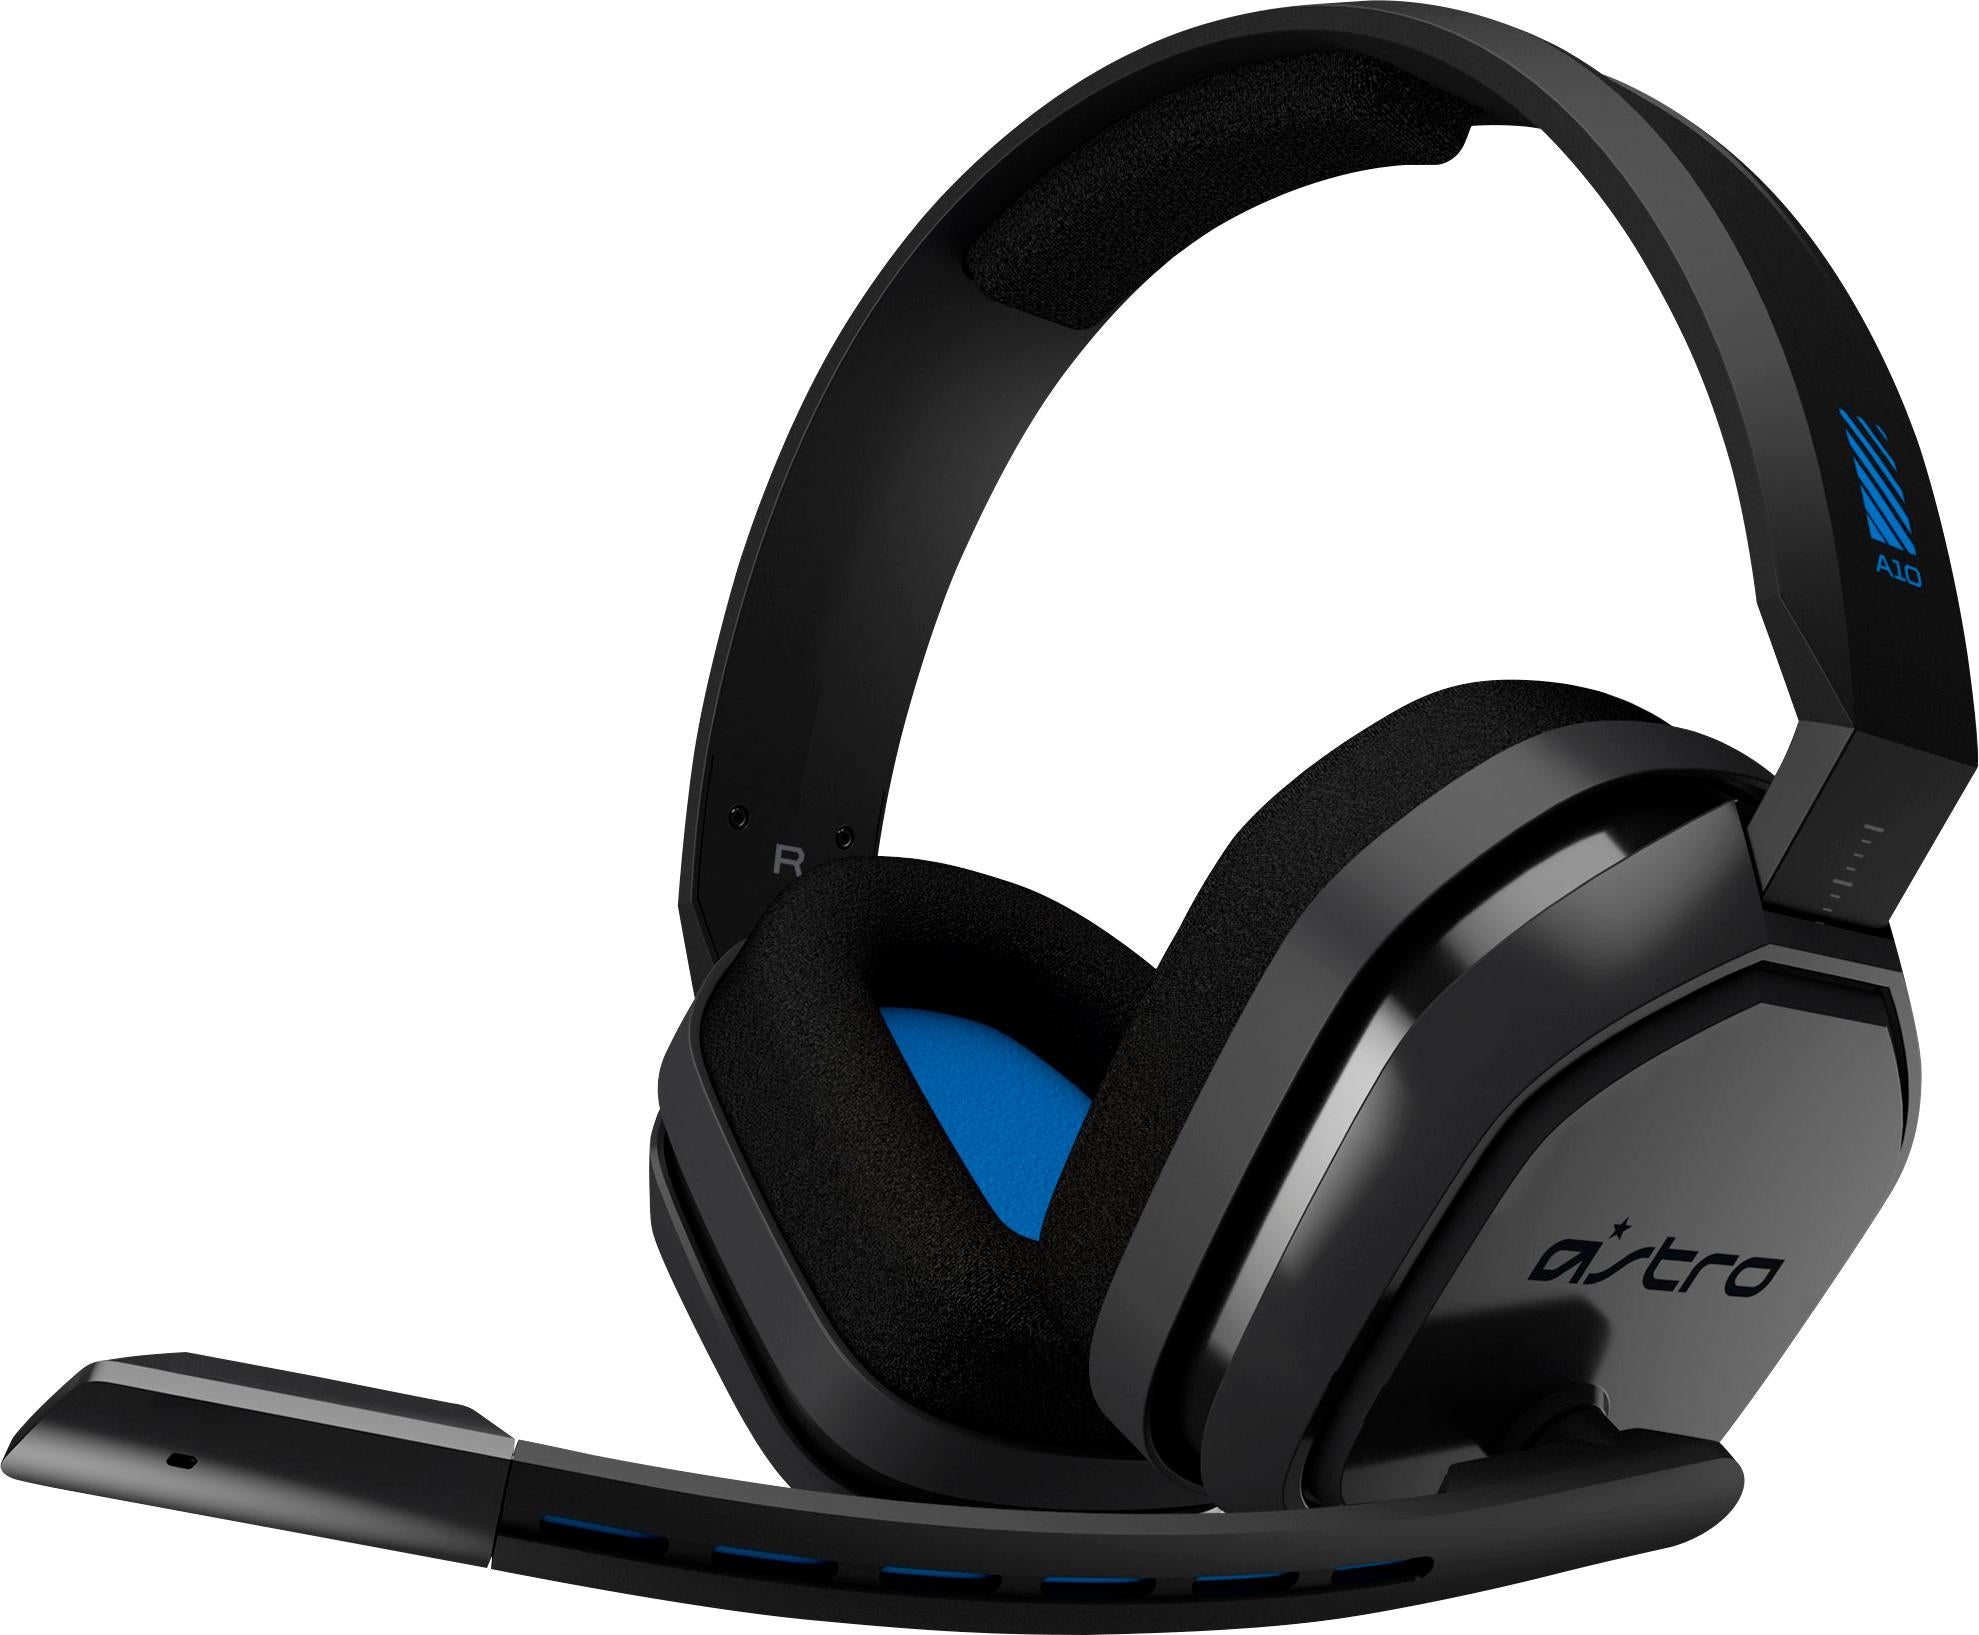 Official Astro Gaming - A10 Wired Stereo Gaming Headset for PlayStation 4 - Blue/Black